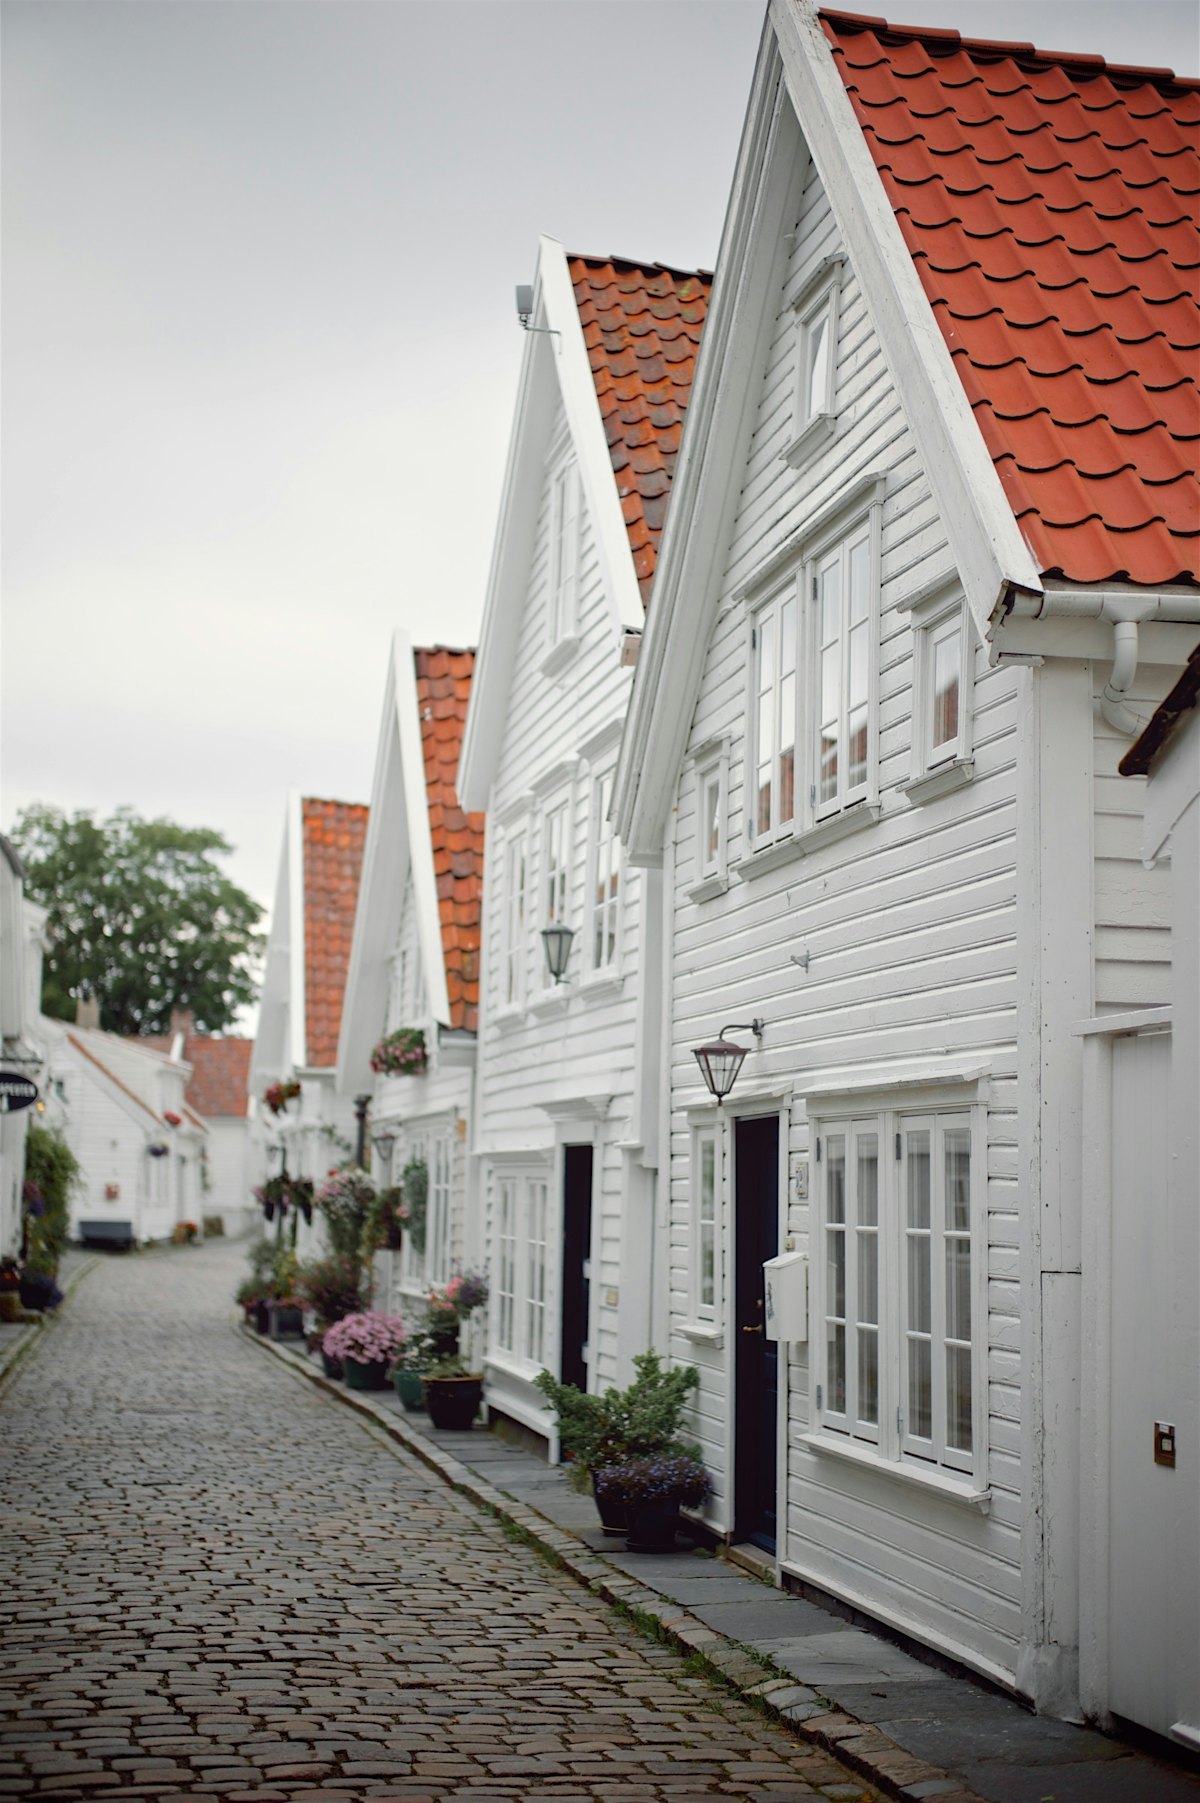 Wooden houses with brick road between